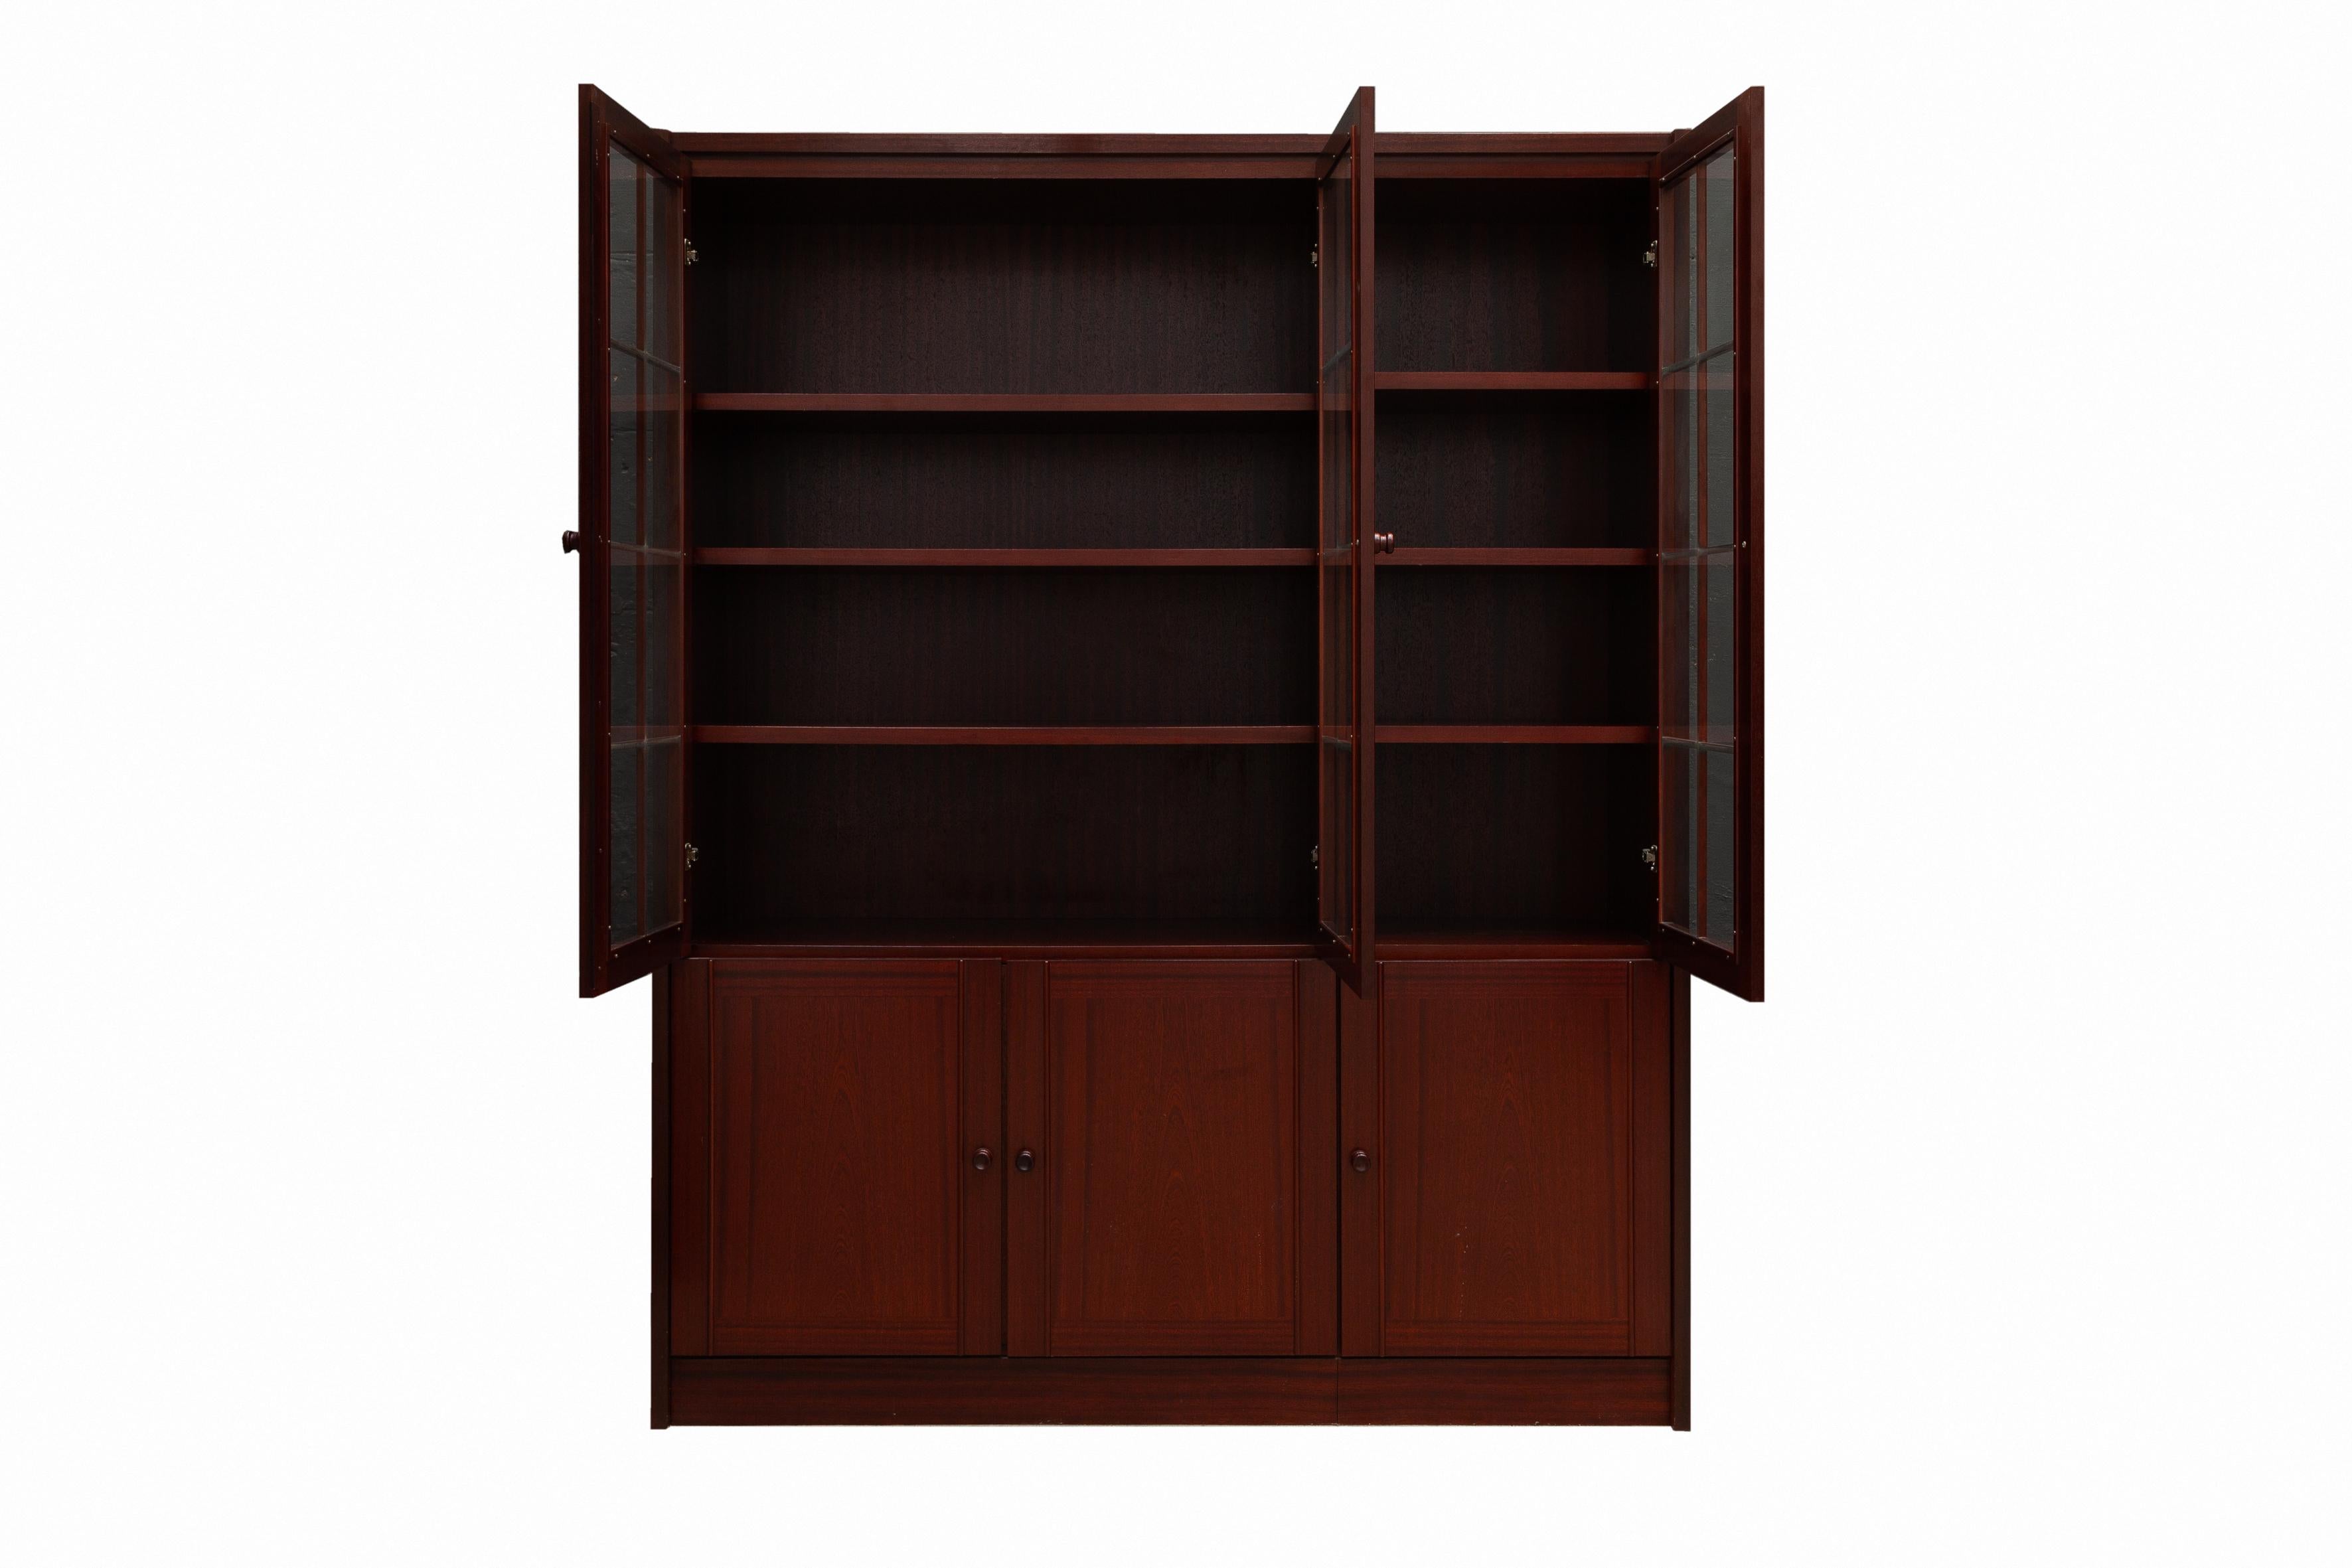 Vintage early 1970s bookshelf or display cabinet by De Coene, Belgium. This three door cabinet is made of solid wood with clear glass. The doors have magnetic closures. Moveable shelves. Excellent condition.
Dimension: 156 W x 194 H x 44 D cm.